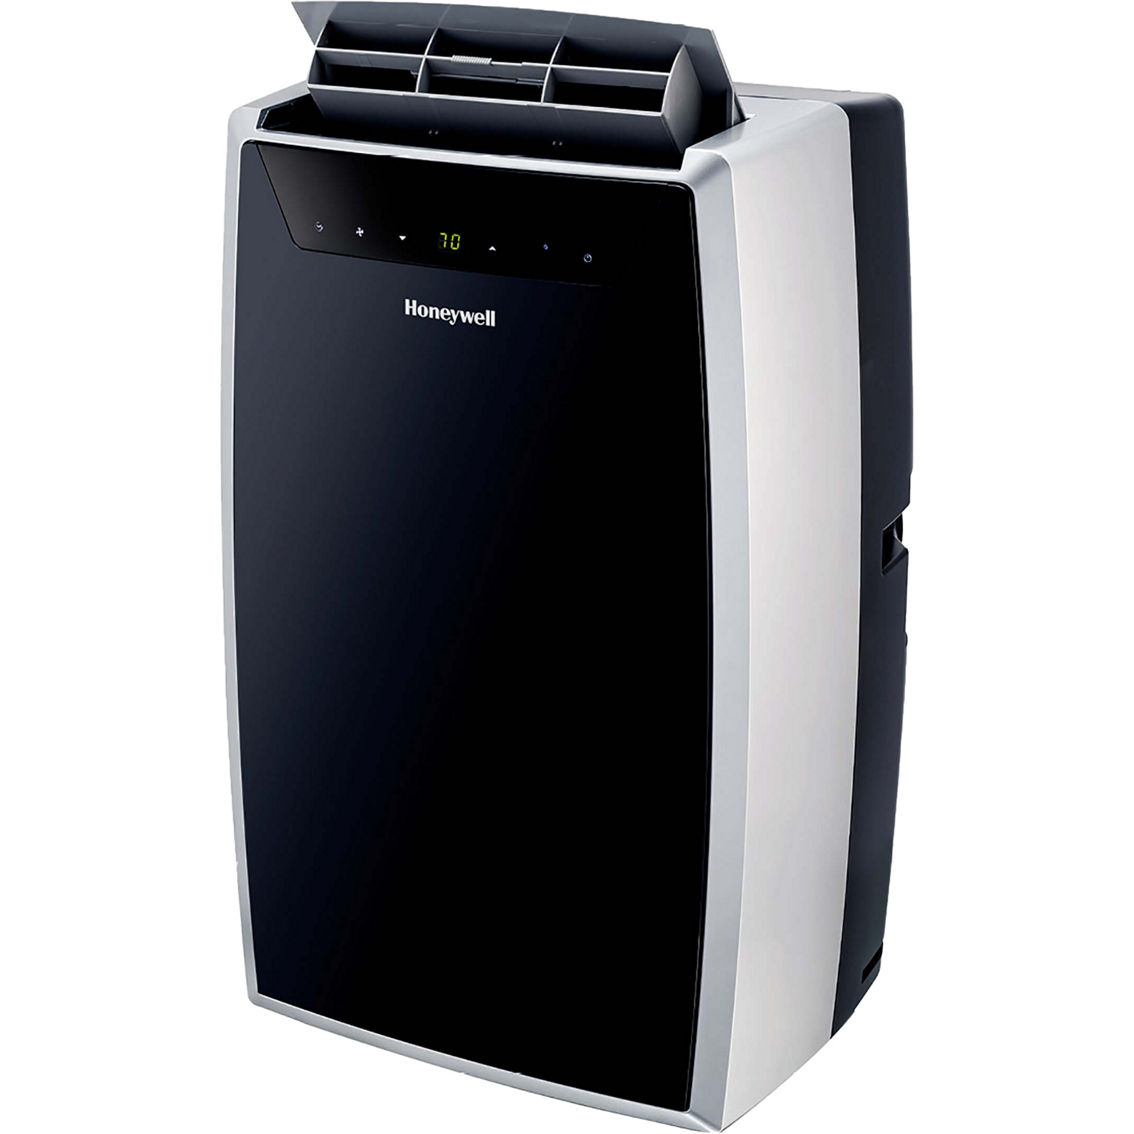 Honeywell 14,000 BTU Heat and Cool Portable Air Conditioner, Dehumidifier and Fan